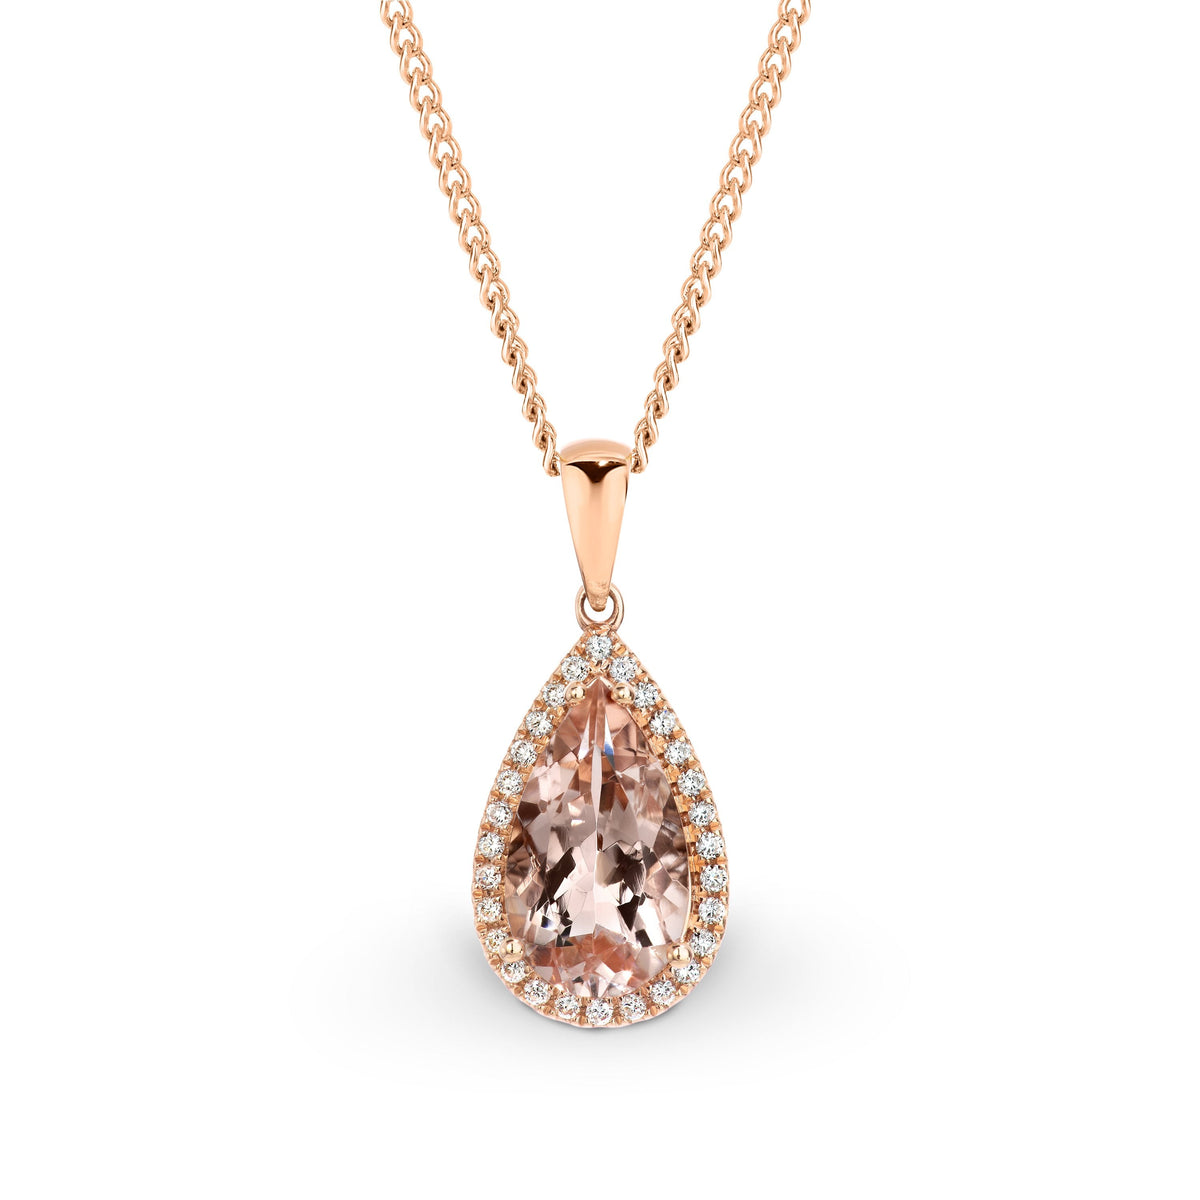 Pearl Necklace - Pink Diamonds Necklace - Rose Gold Necklace - Rose Gold Necklace Diamond - Rose Gold Necklace Heart - Rose Gold Necklace With Pendant - White Gold Necklace Diamond - White Gold Necklace Heart - White Gold Necklaces - Duffs Jewellers